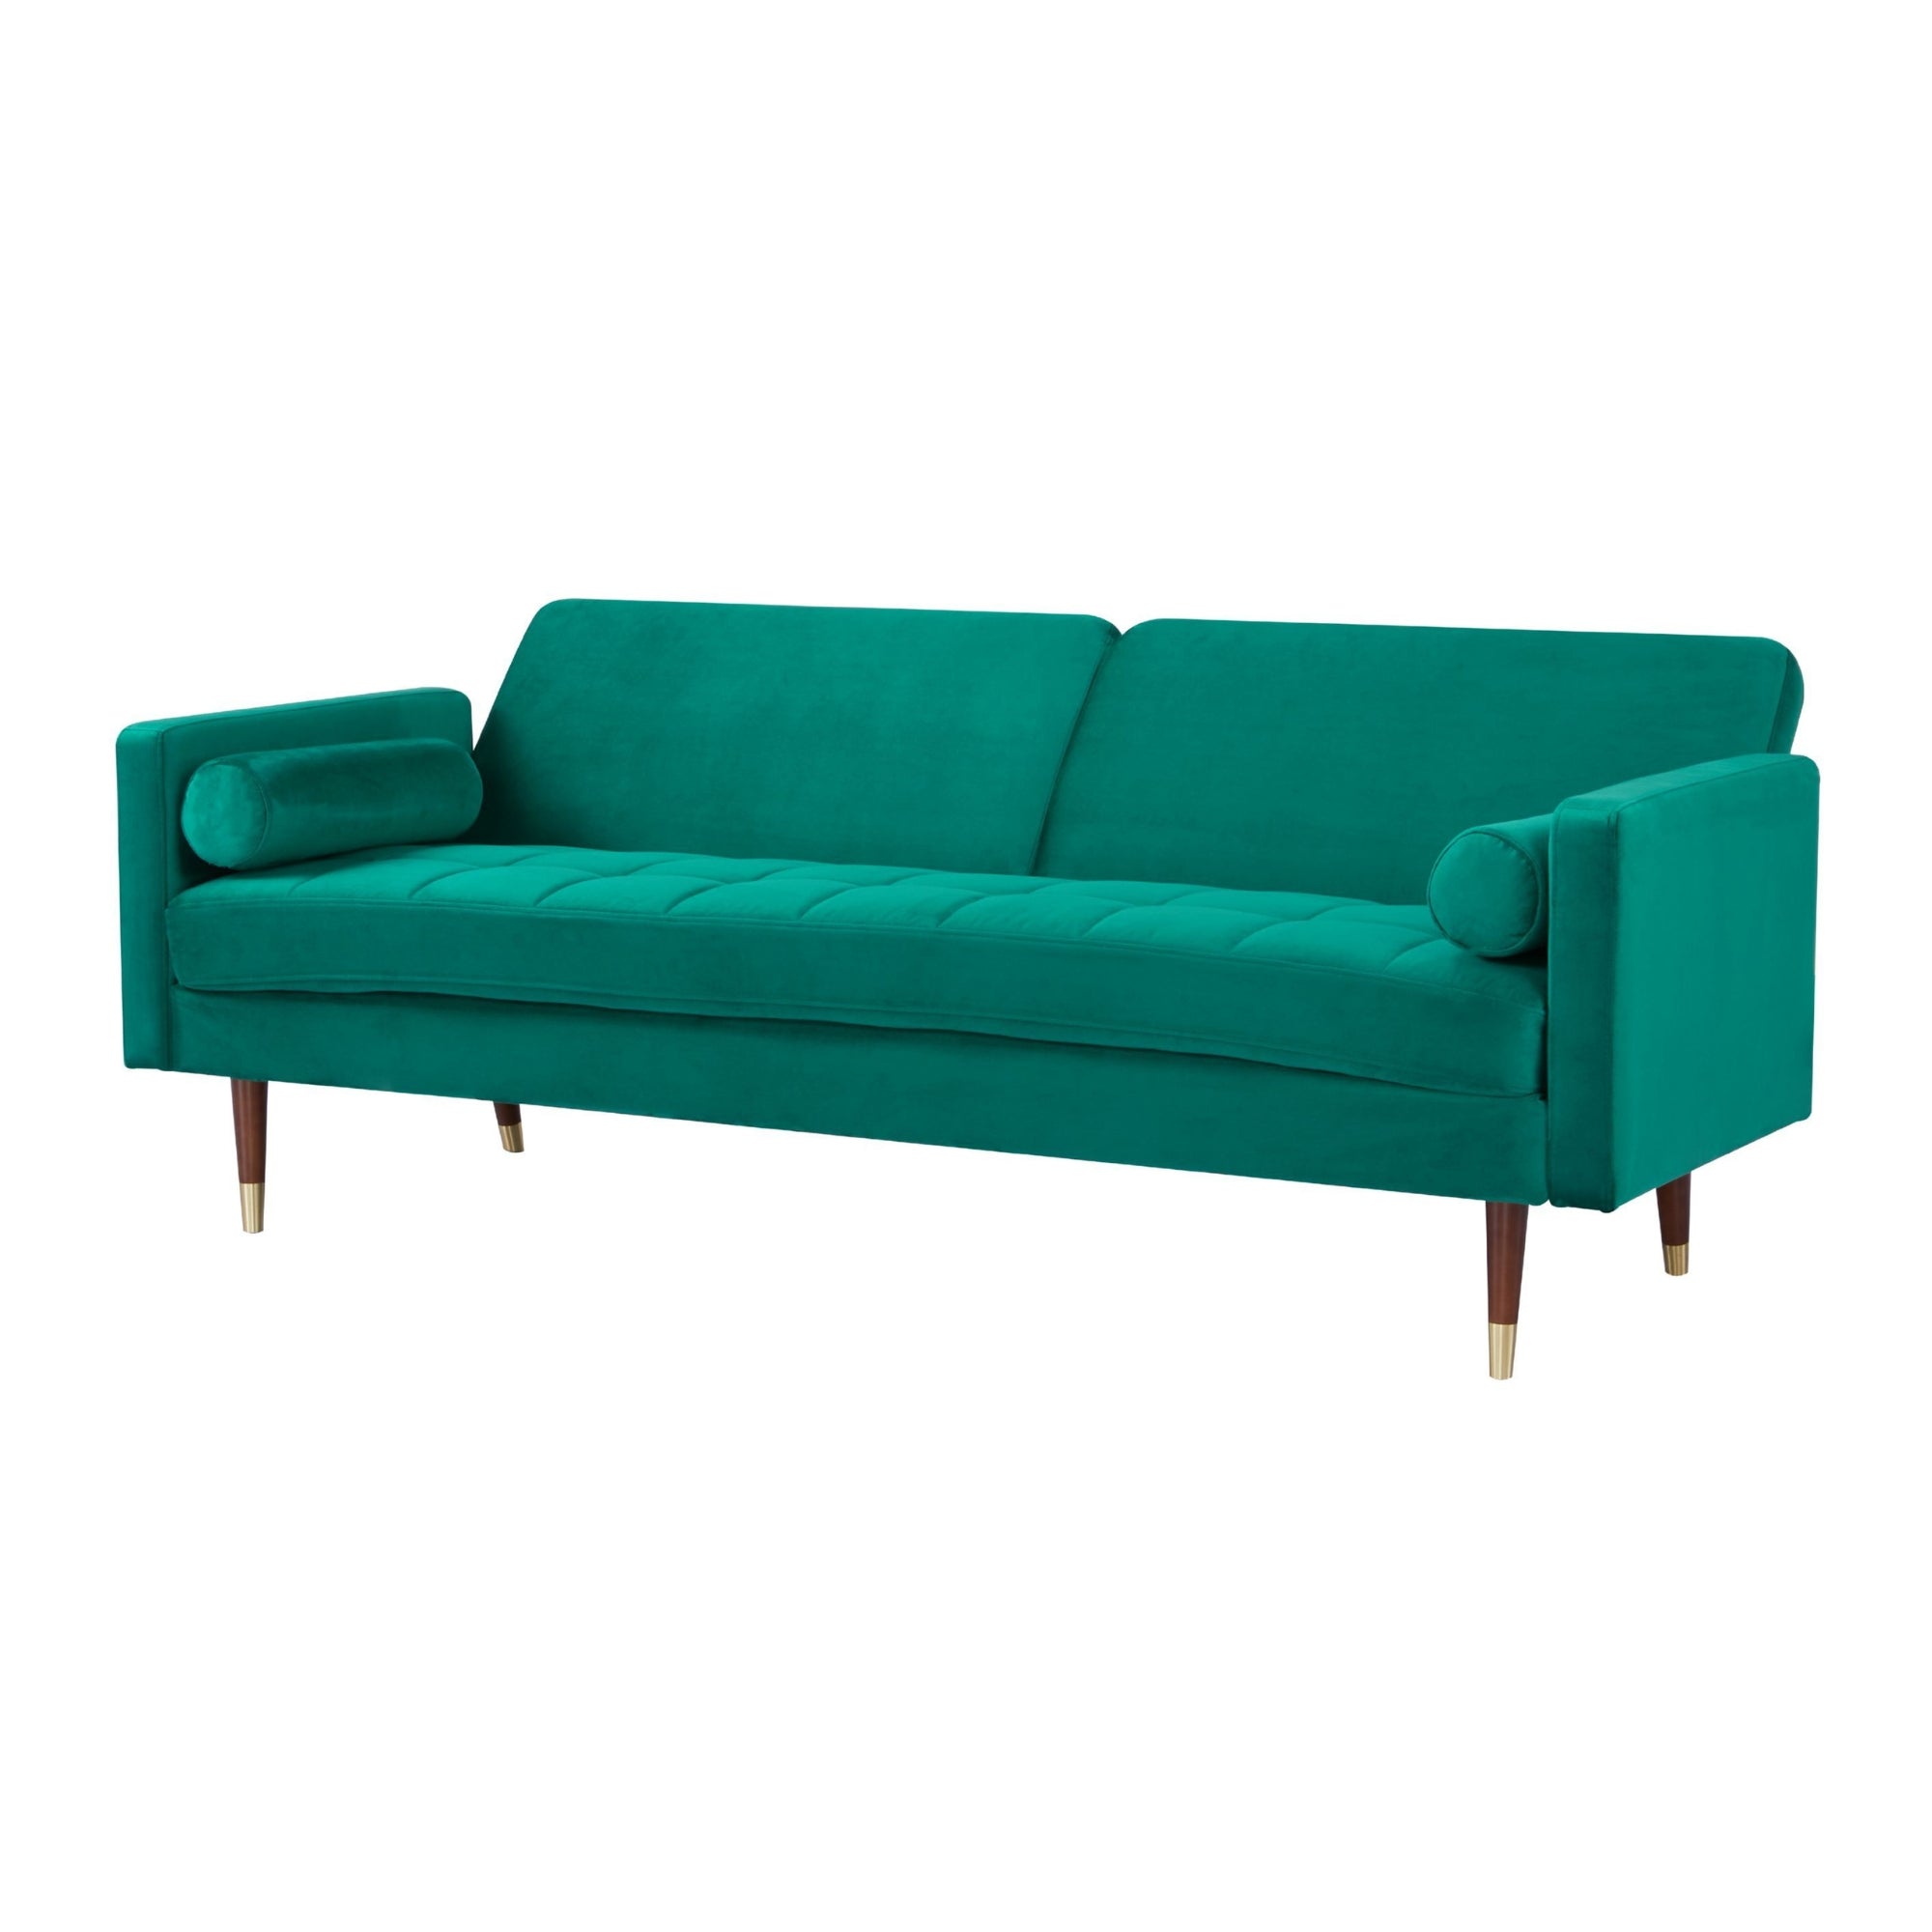 Green 3-Seater Sofa Bed, Polyester Upholstered, Pine Frame